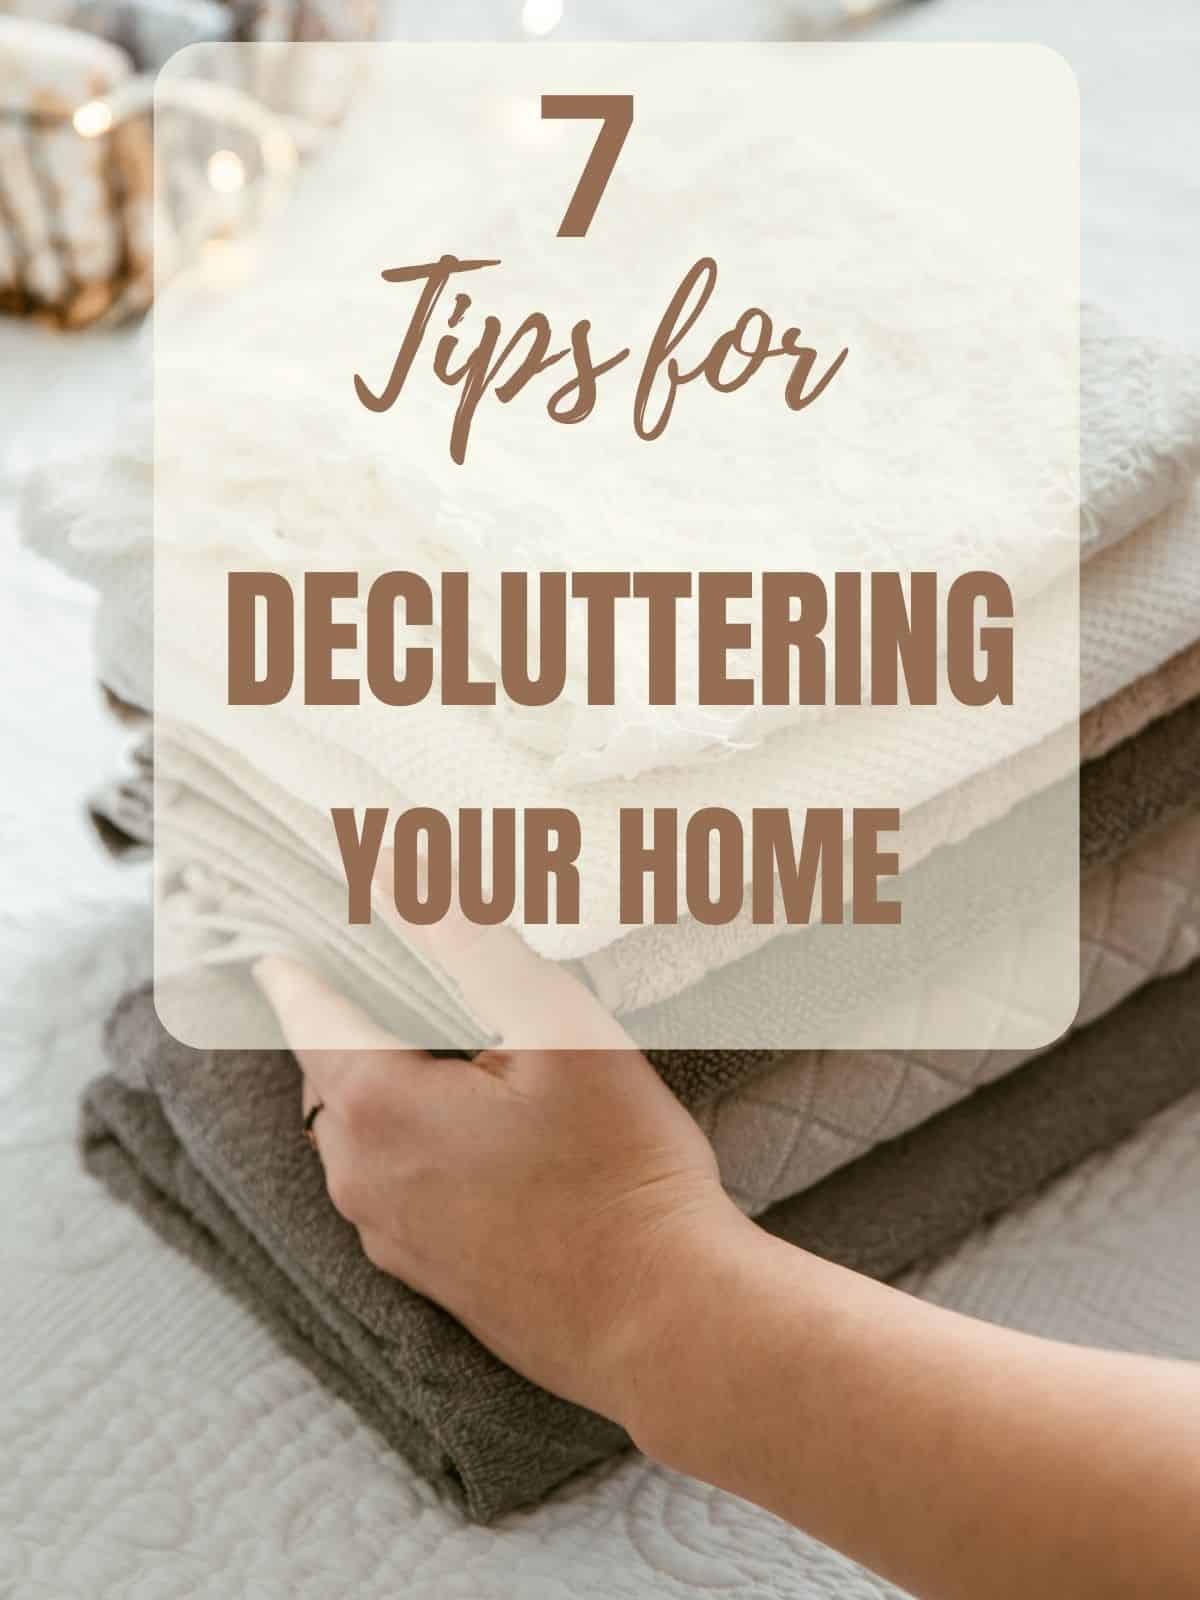 7 tips for decluttering your home with hands folding clothes in the background.